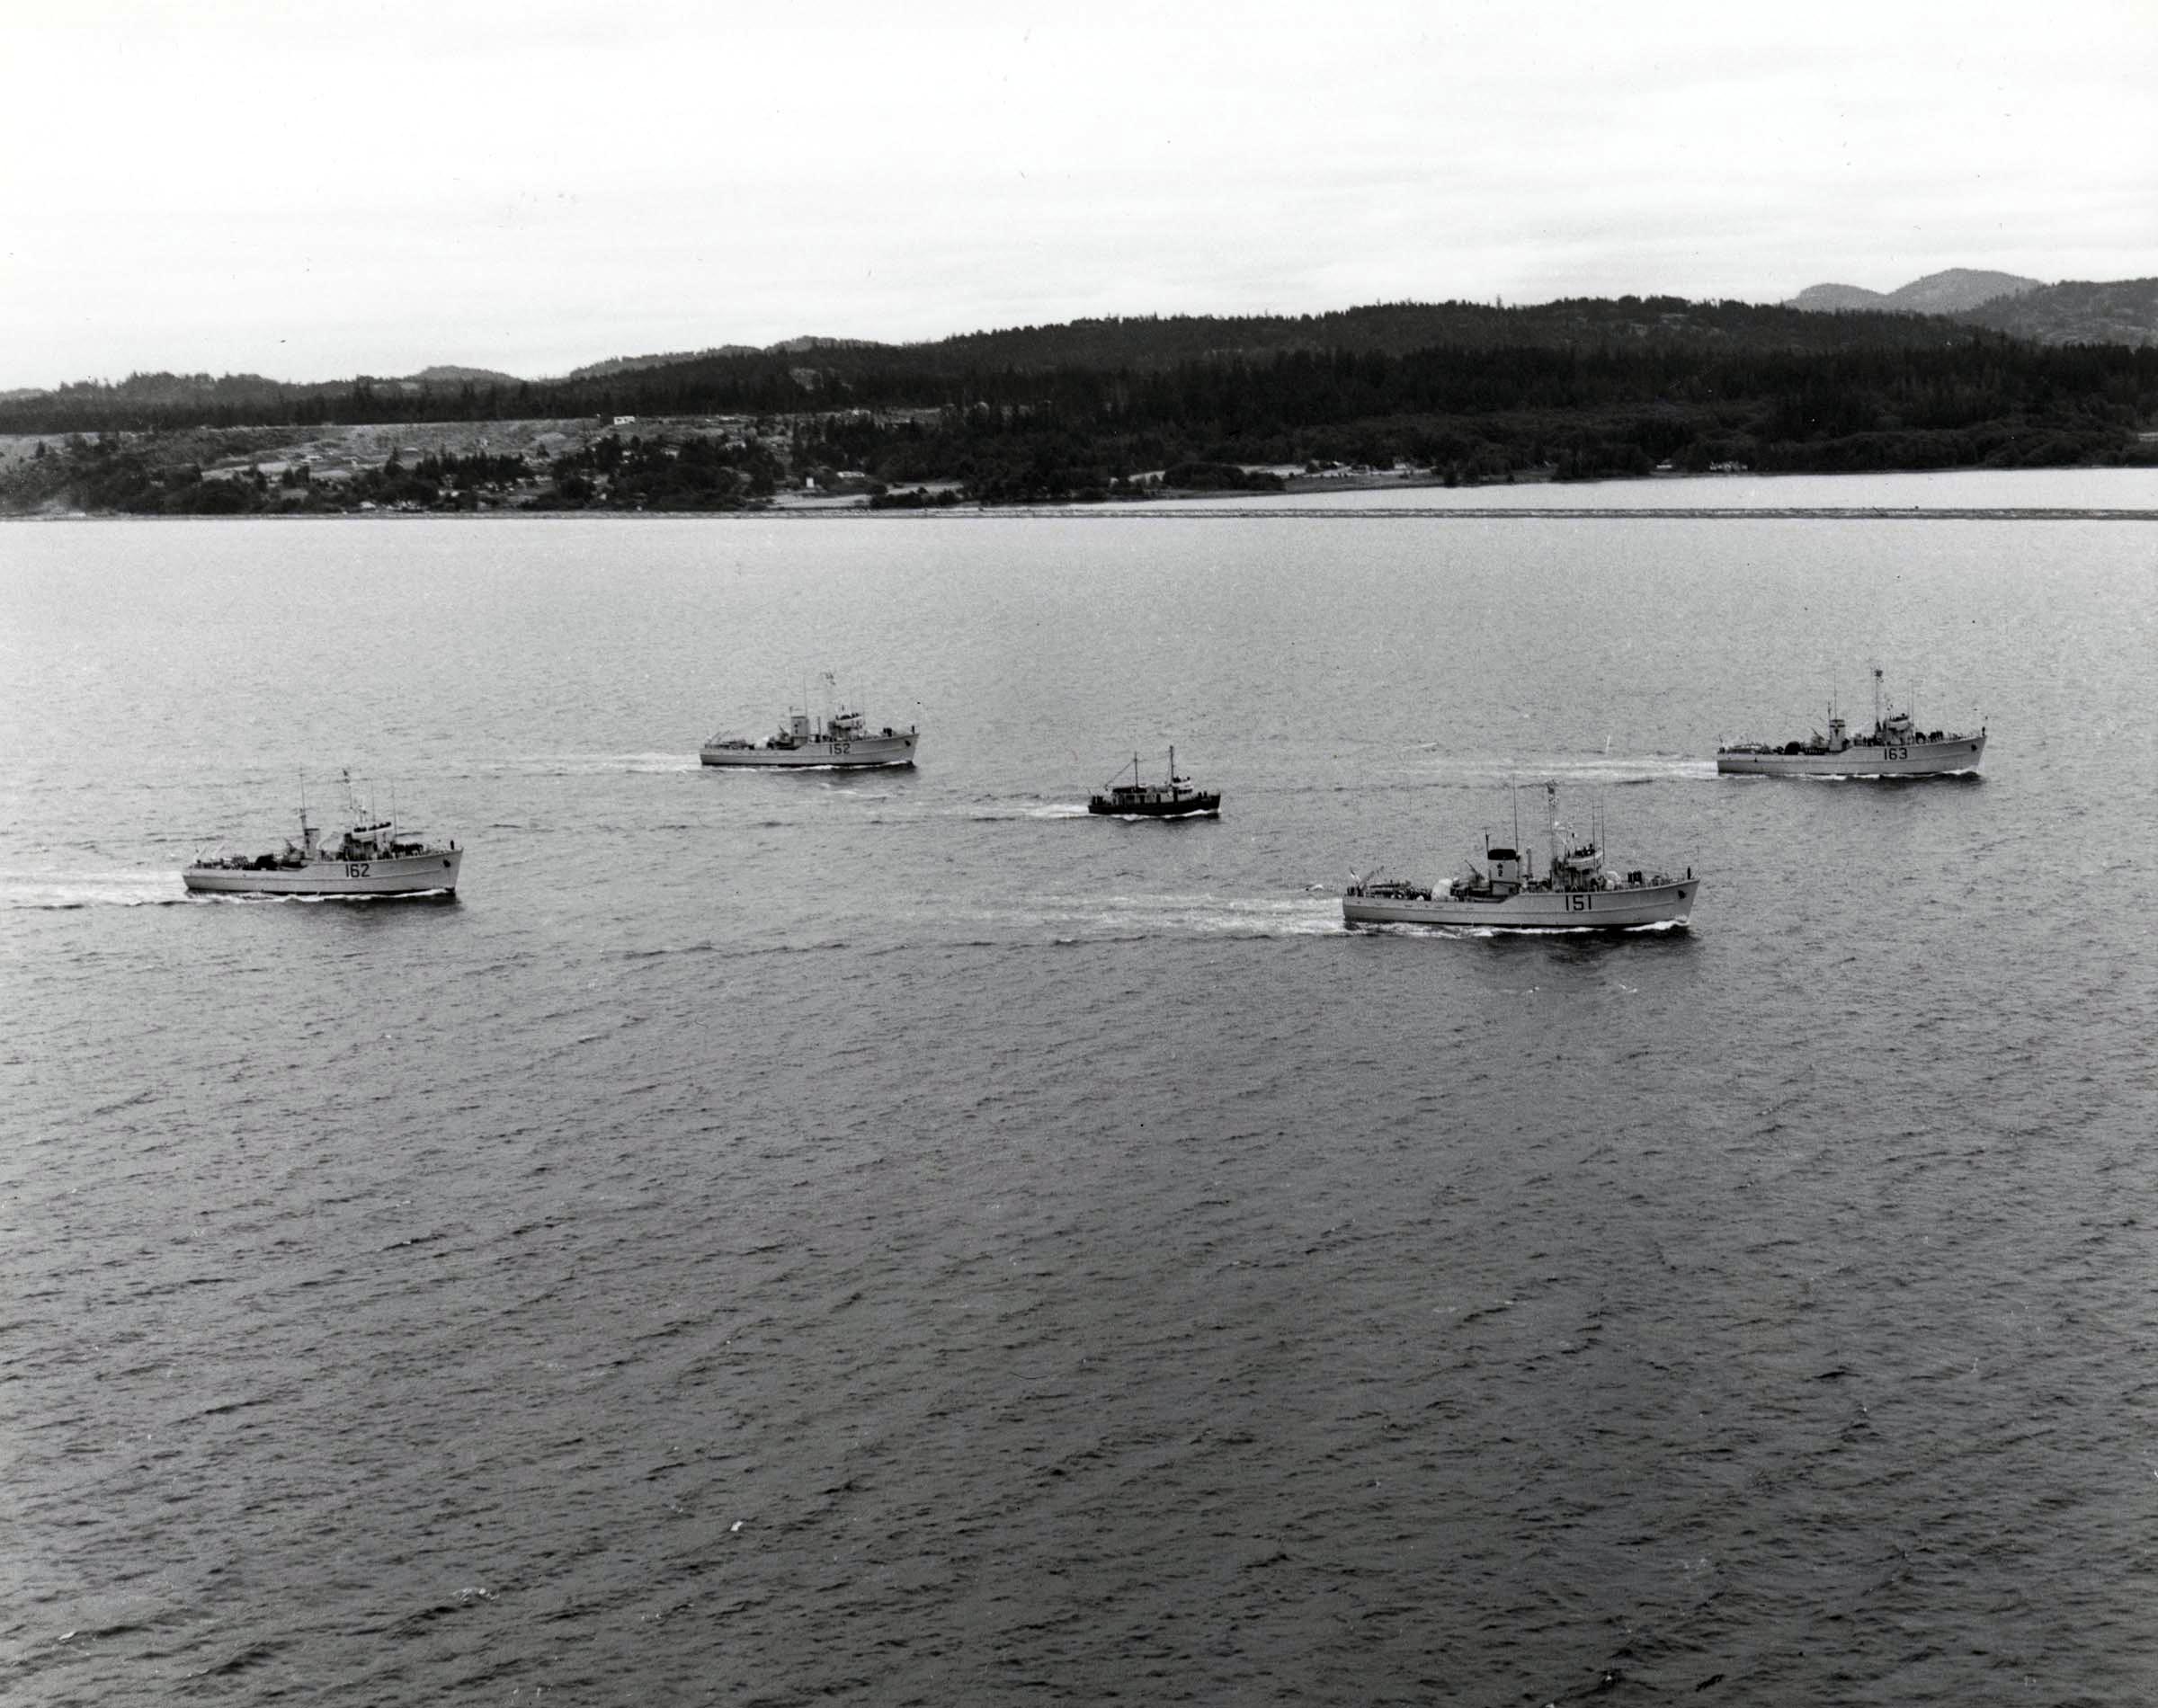 Mirimachi leads a squadron of minesweepers.